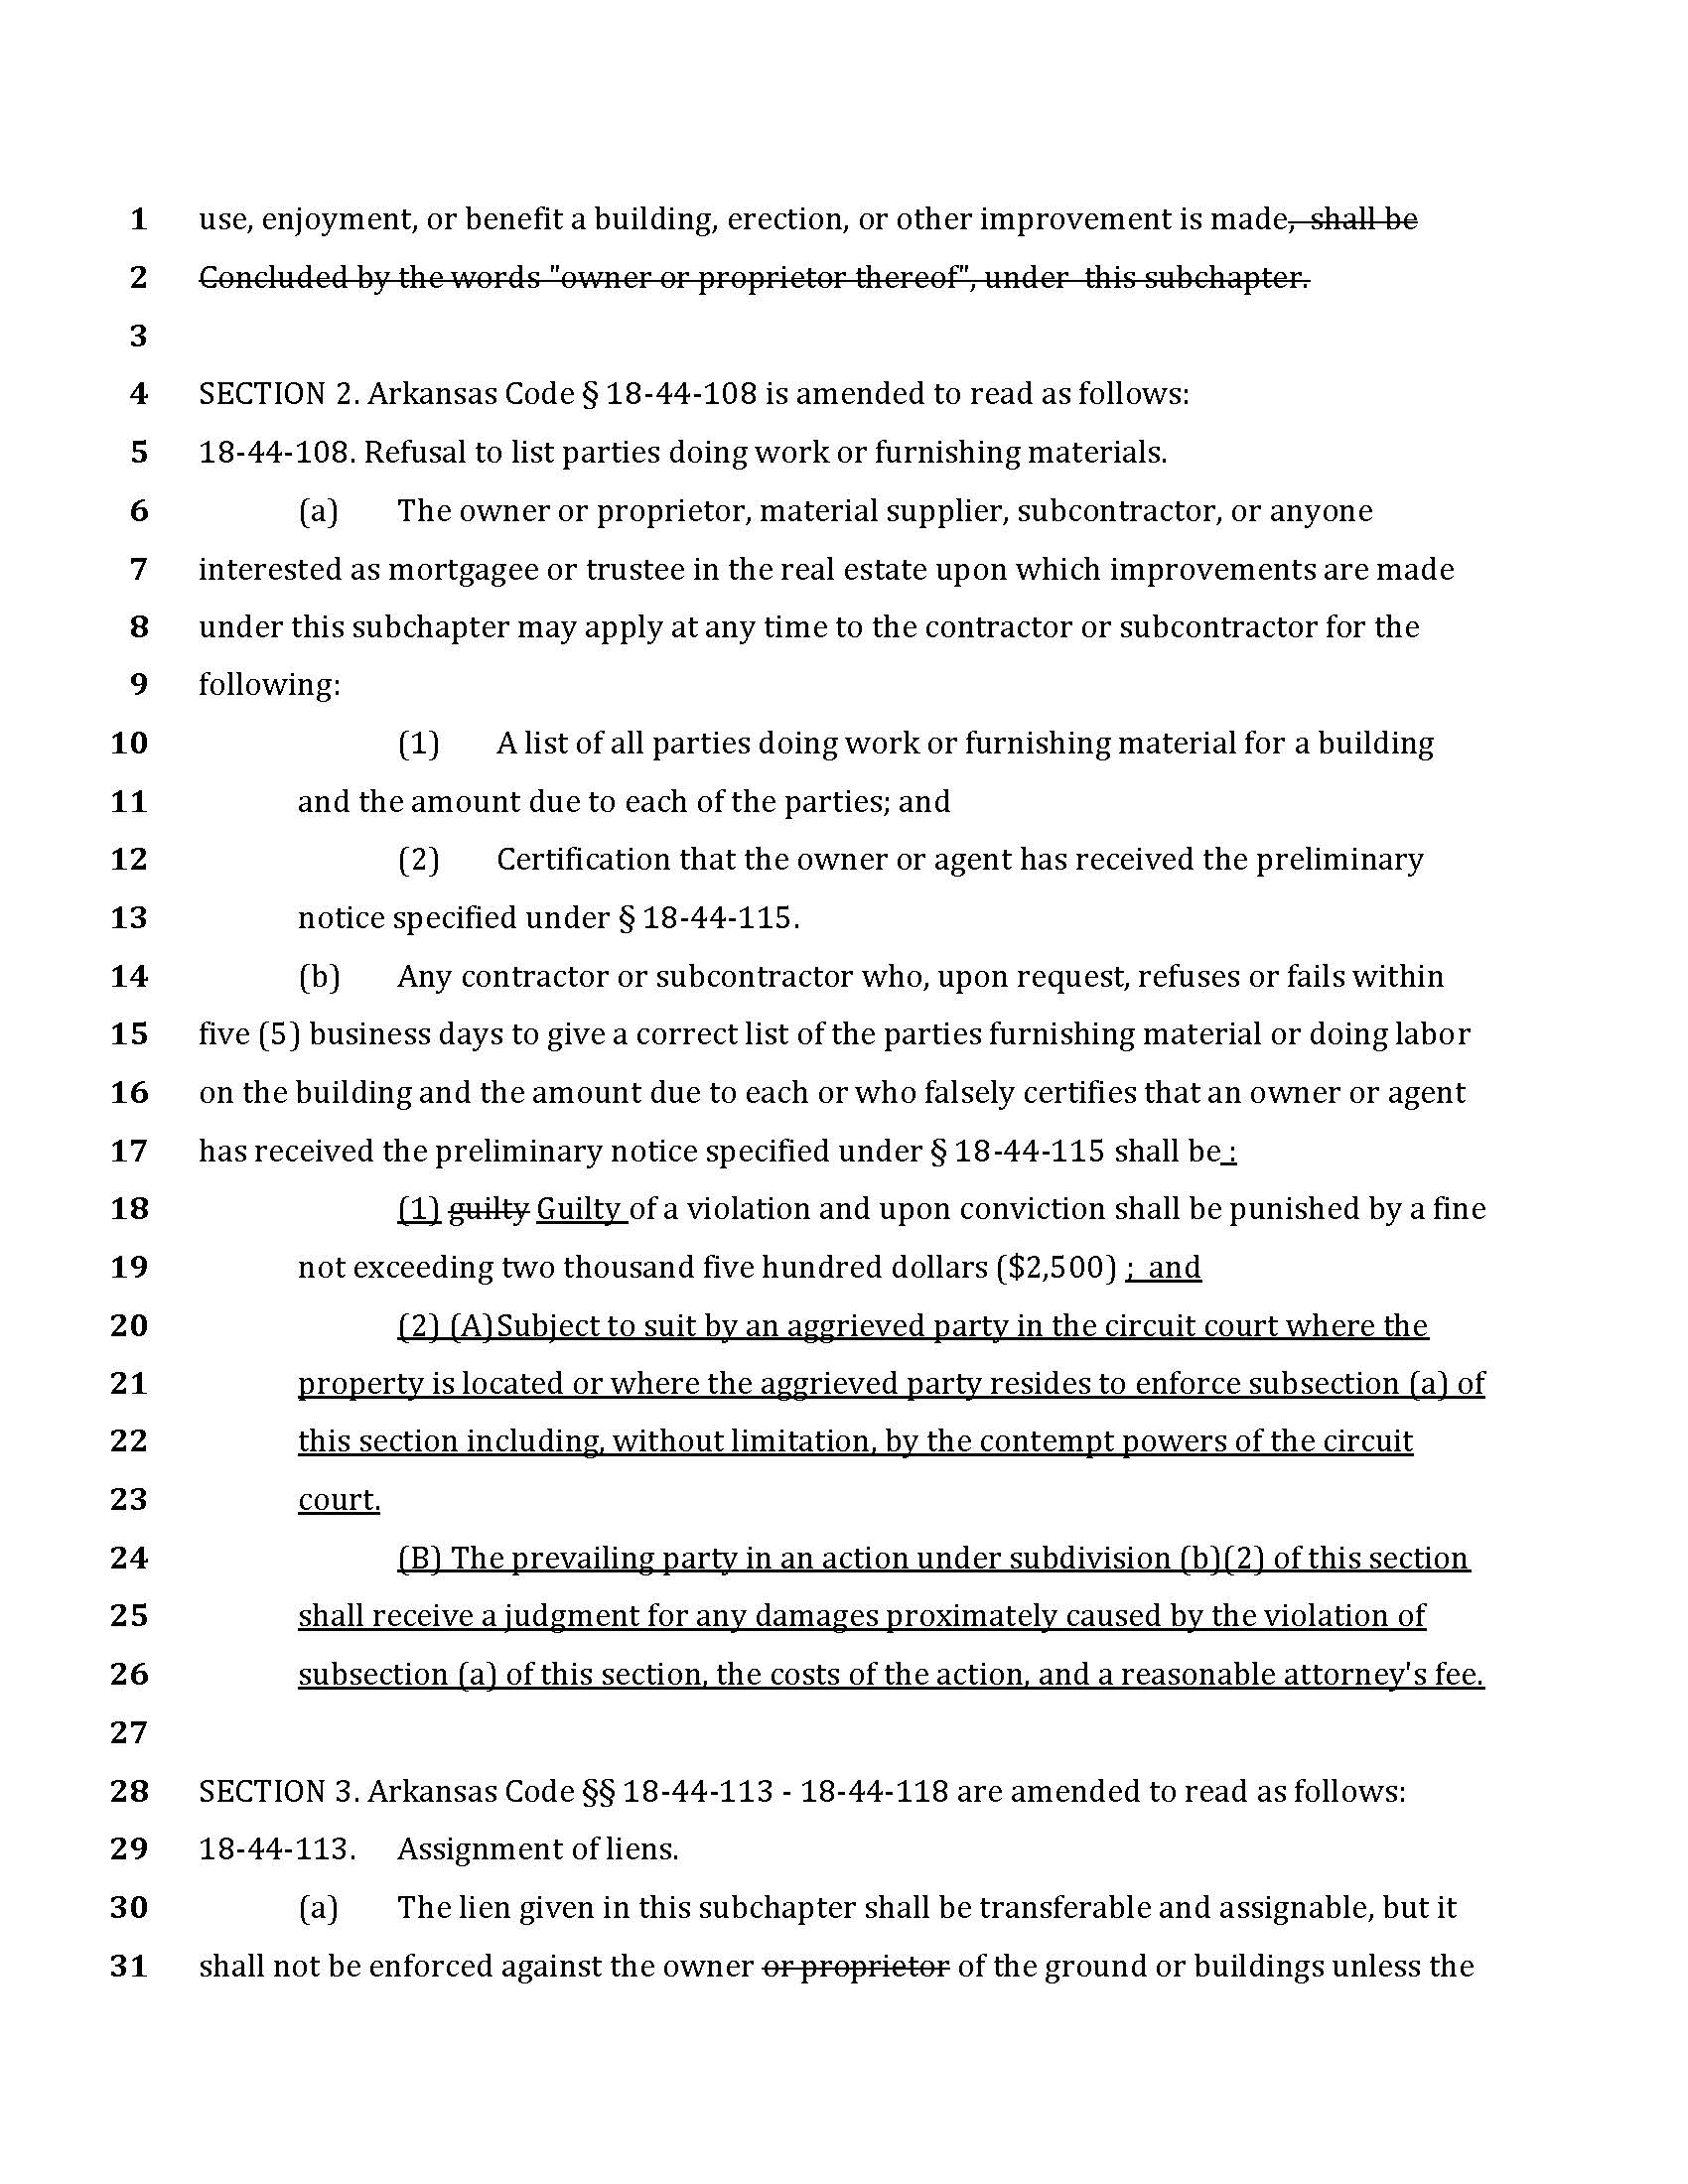 final-bill-lien-law-revisions_Page_03.jpg